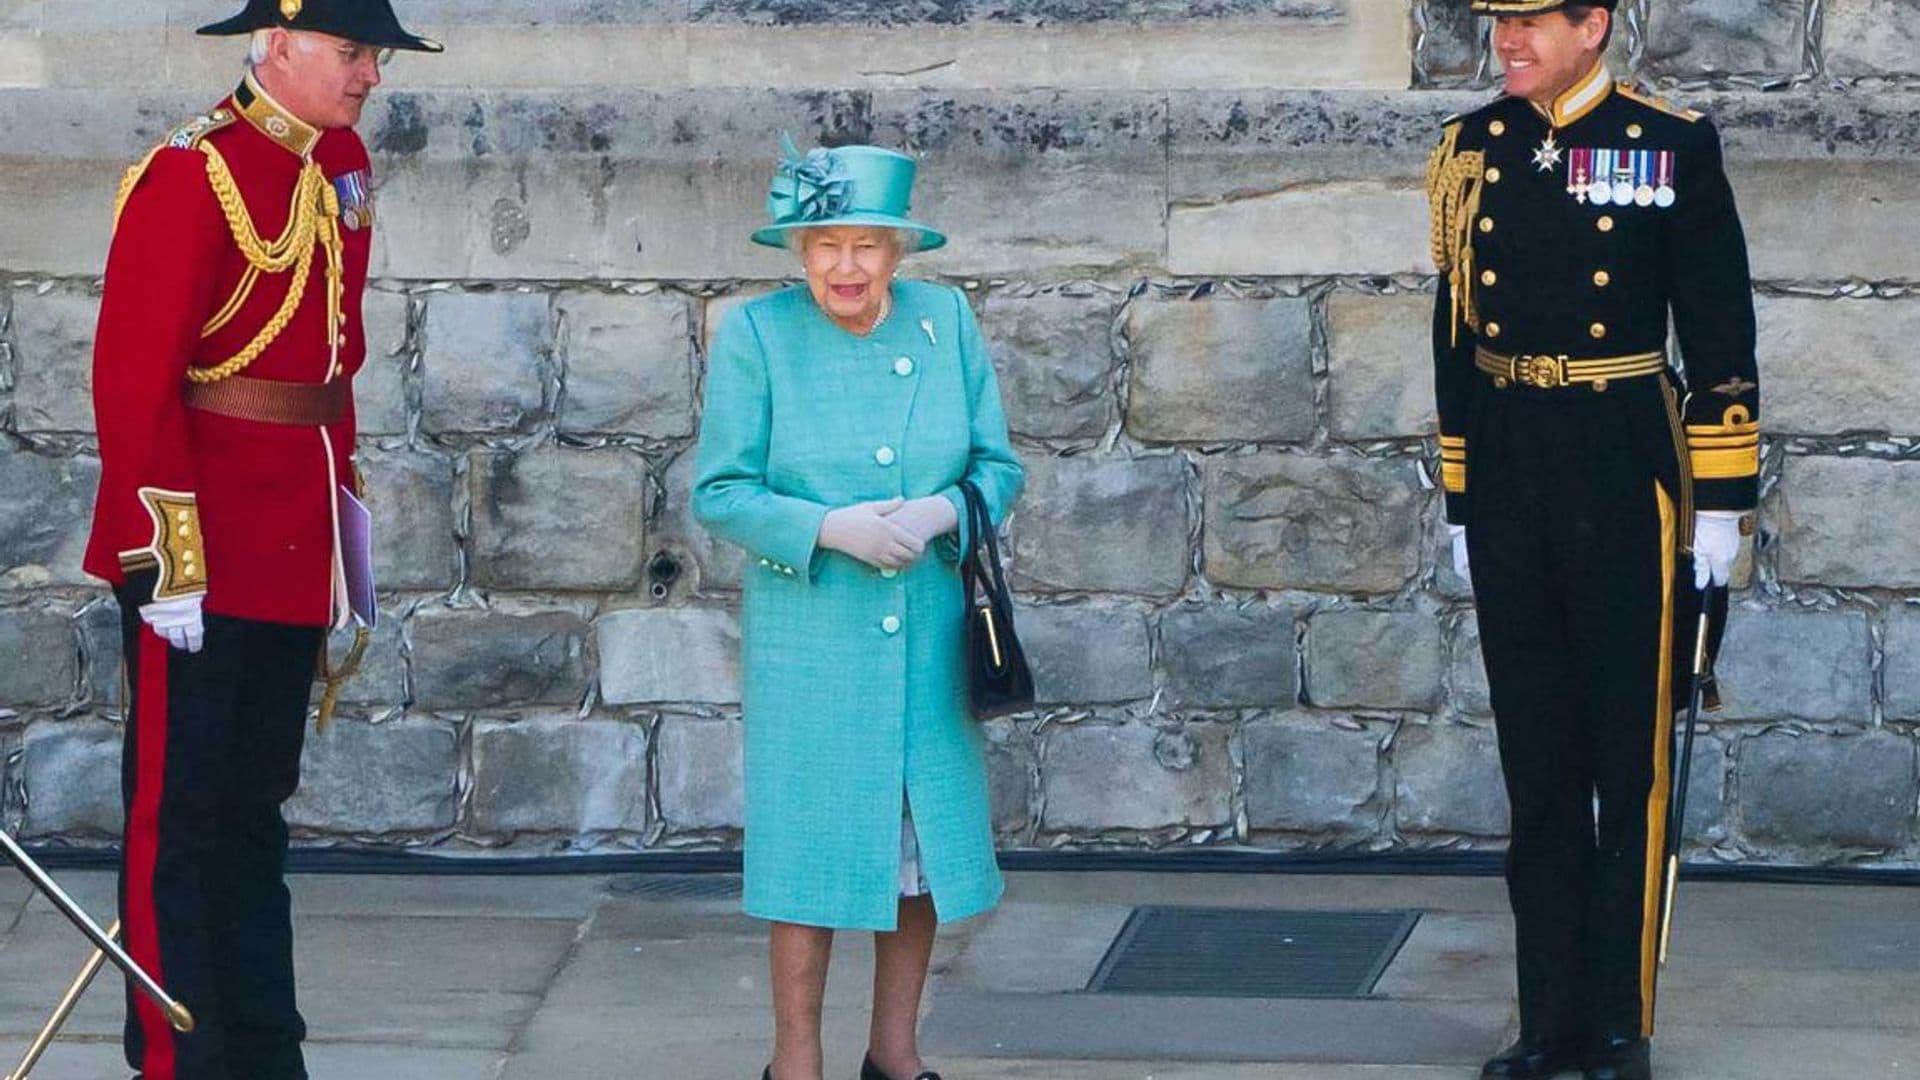 The outfit, the dancing, how Queen Elizabeth celebrated Trooping the Colour 2020